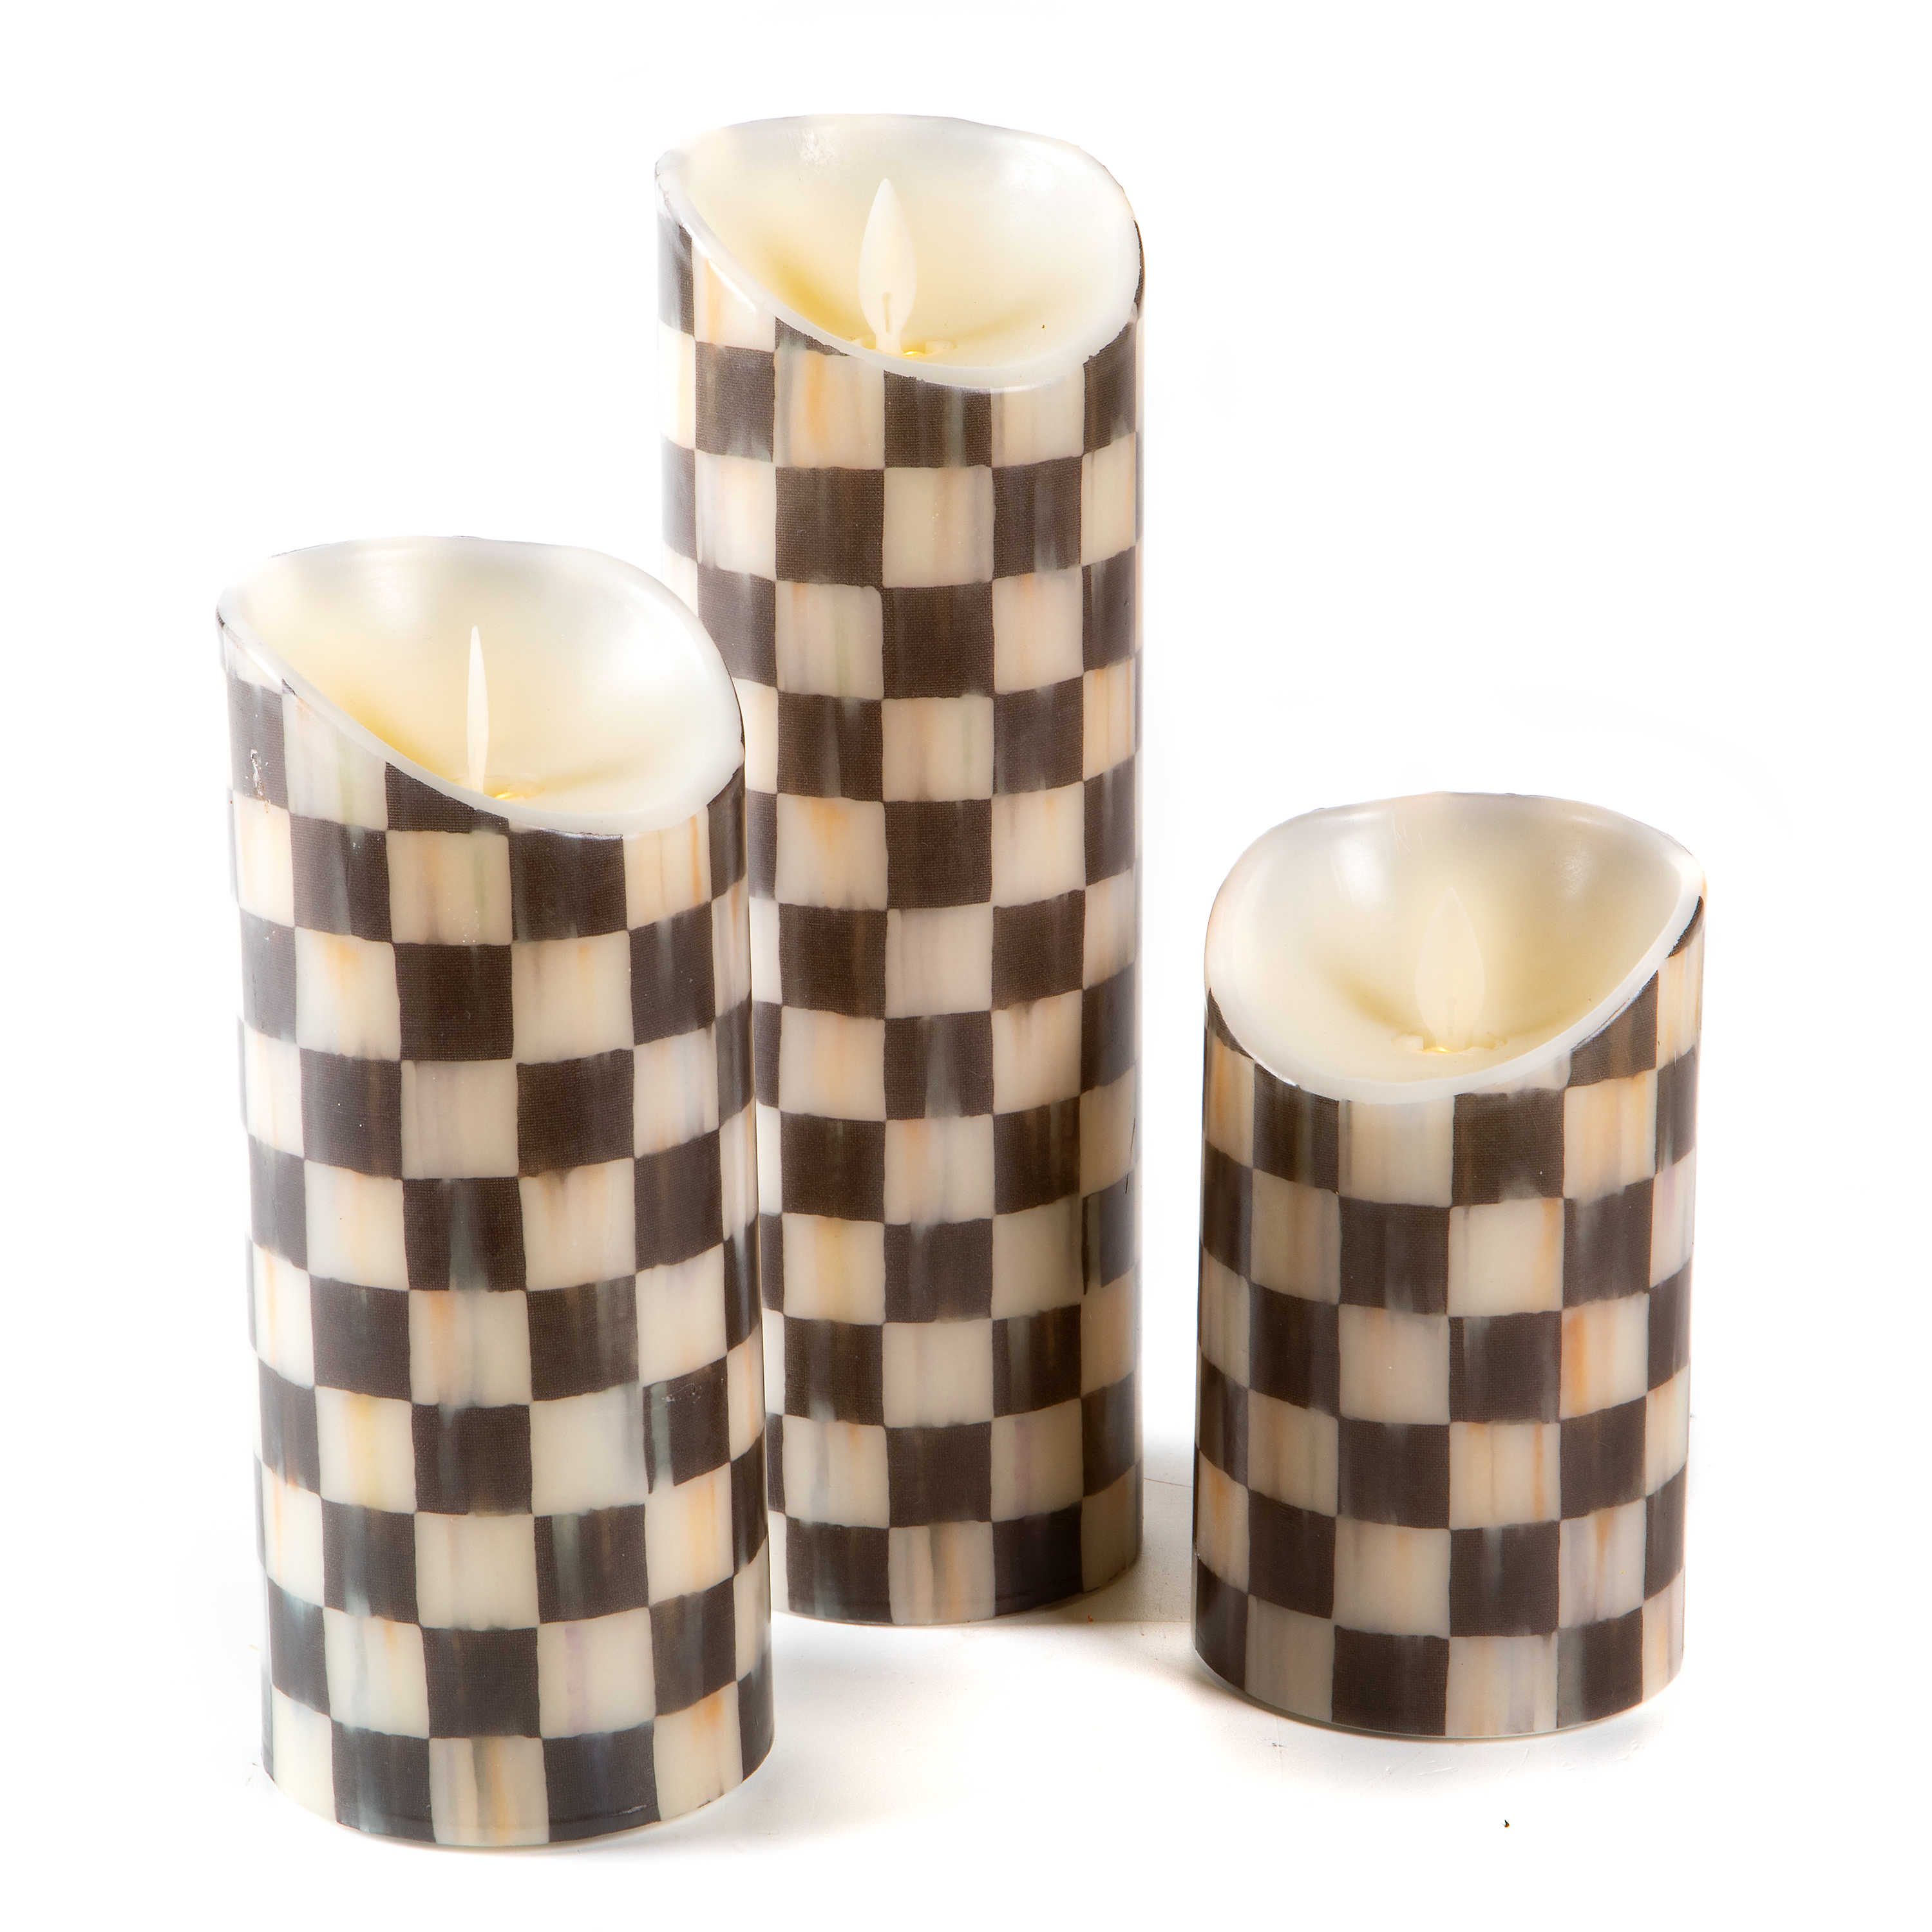 Courtly Check Flicker Candles - Set of 3 mackenzie-childs Panama 0